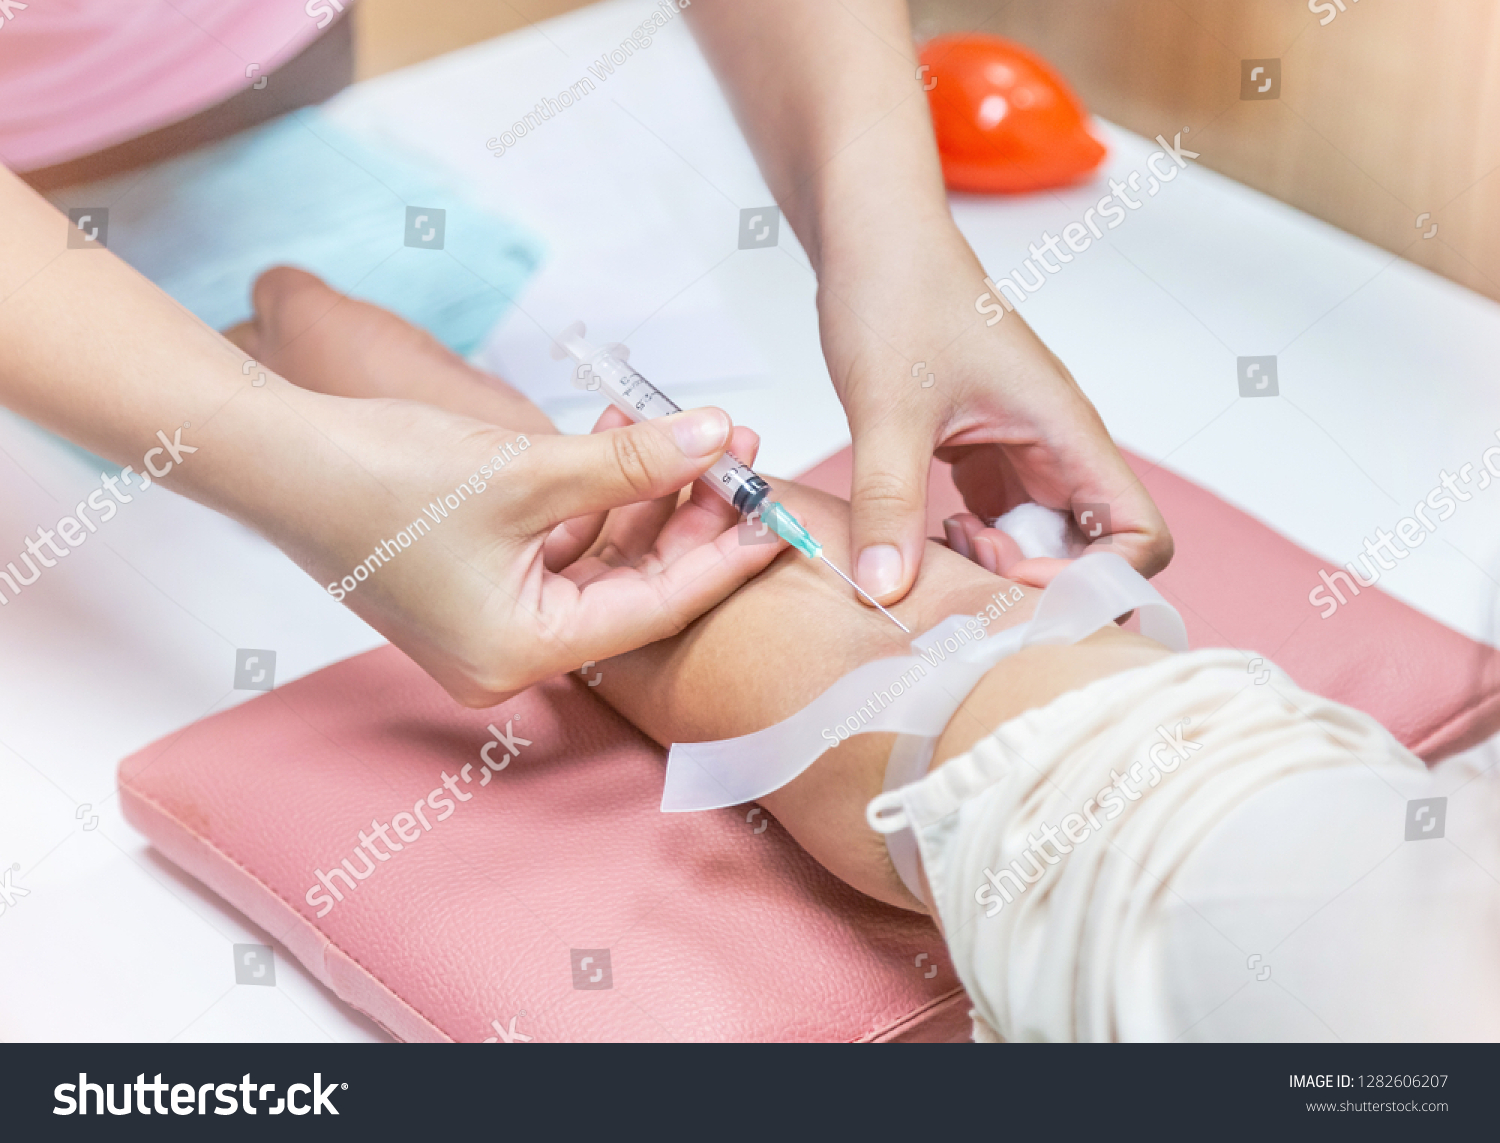 Nurse injecting with syringe to patient's arm drawing blood sample for blood test in hospital #1282606207